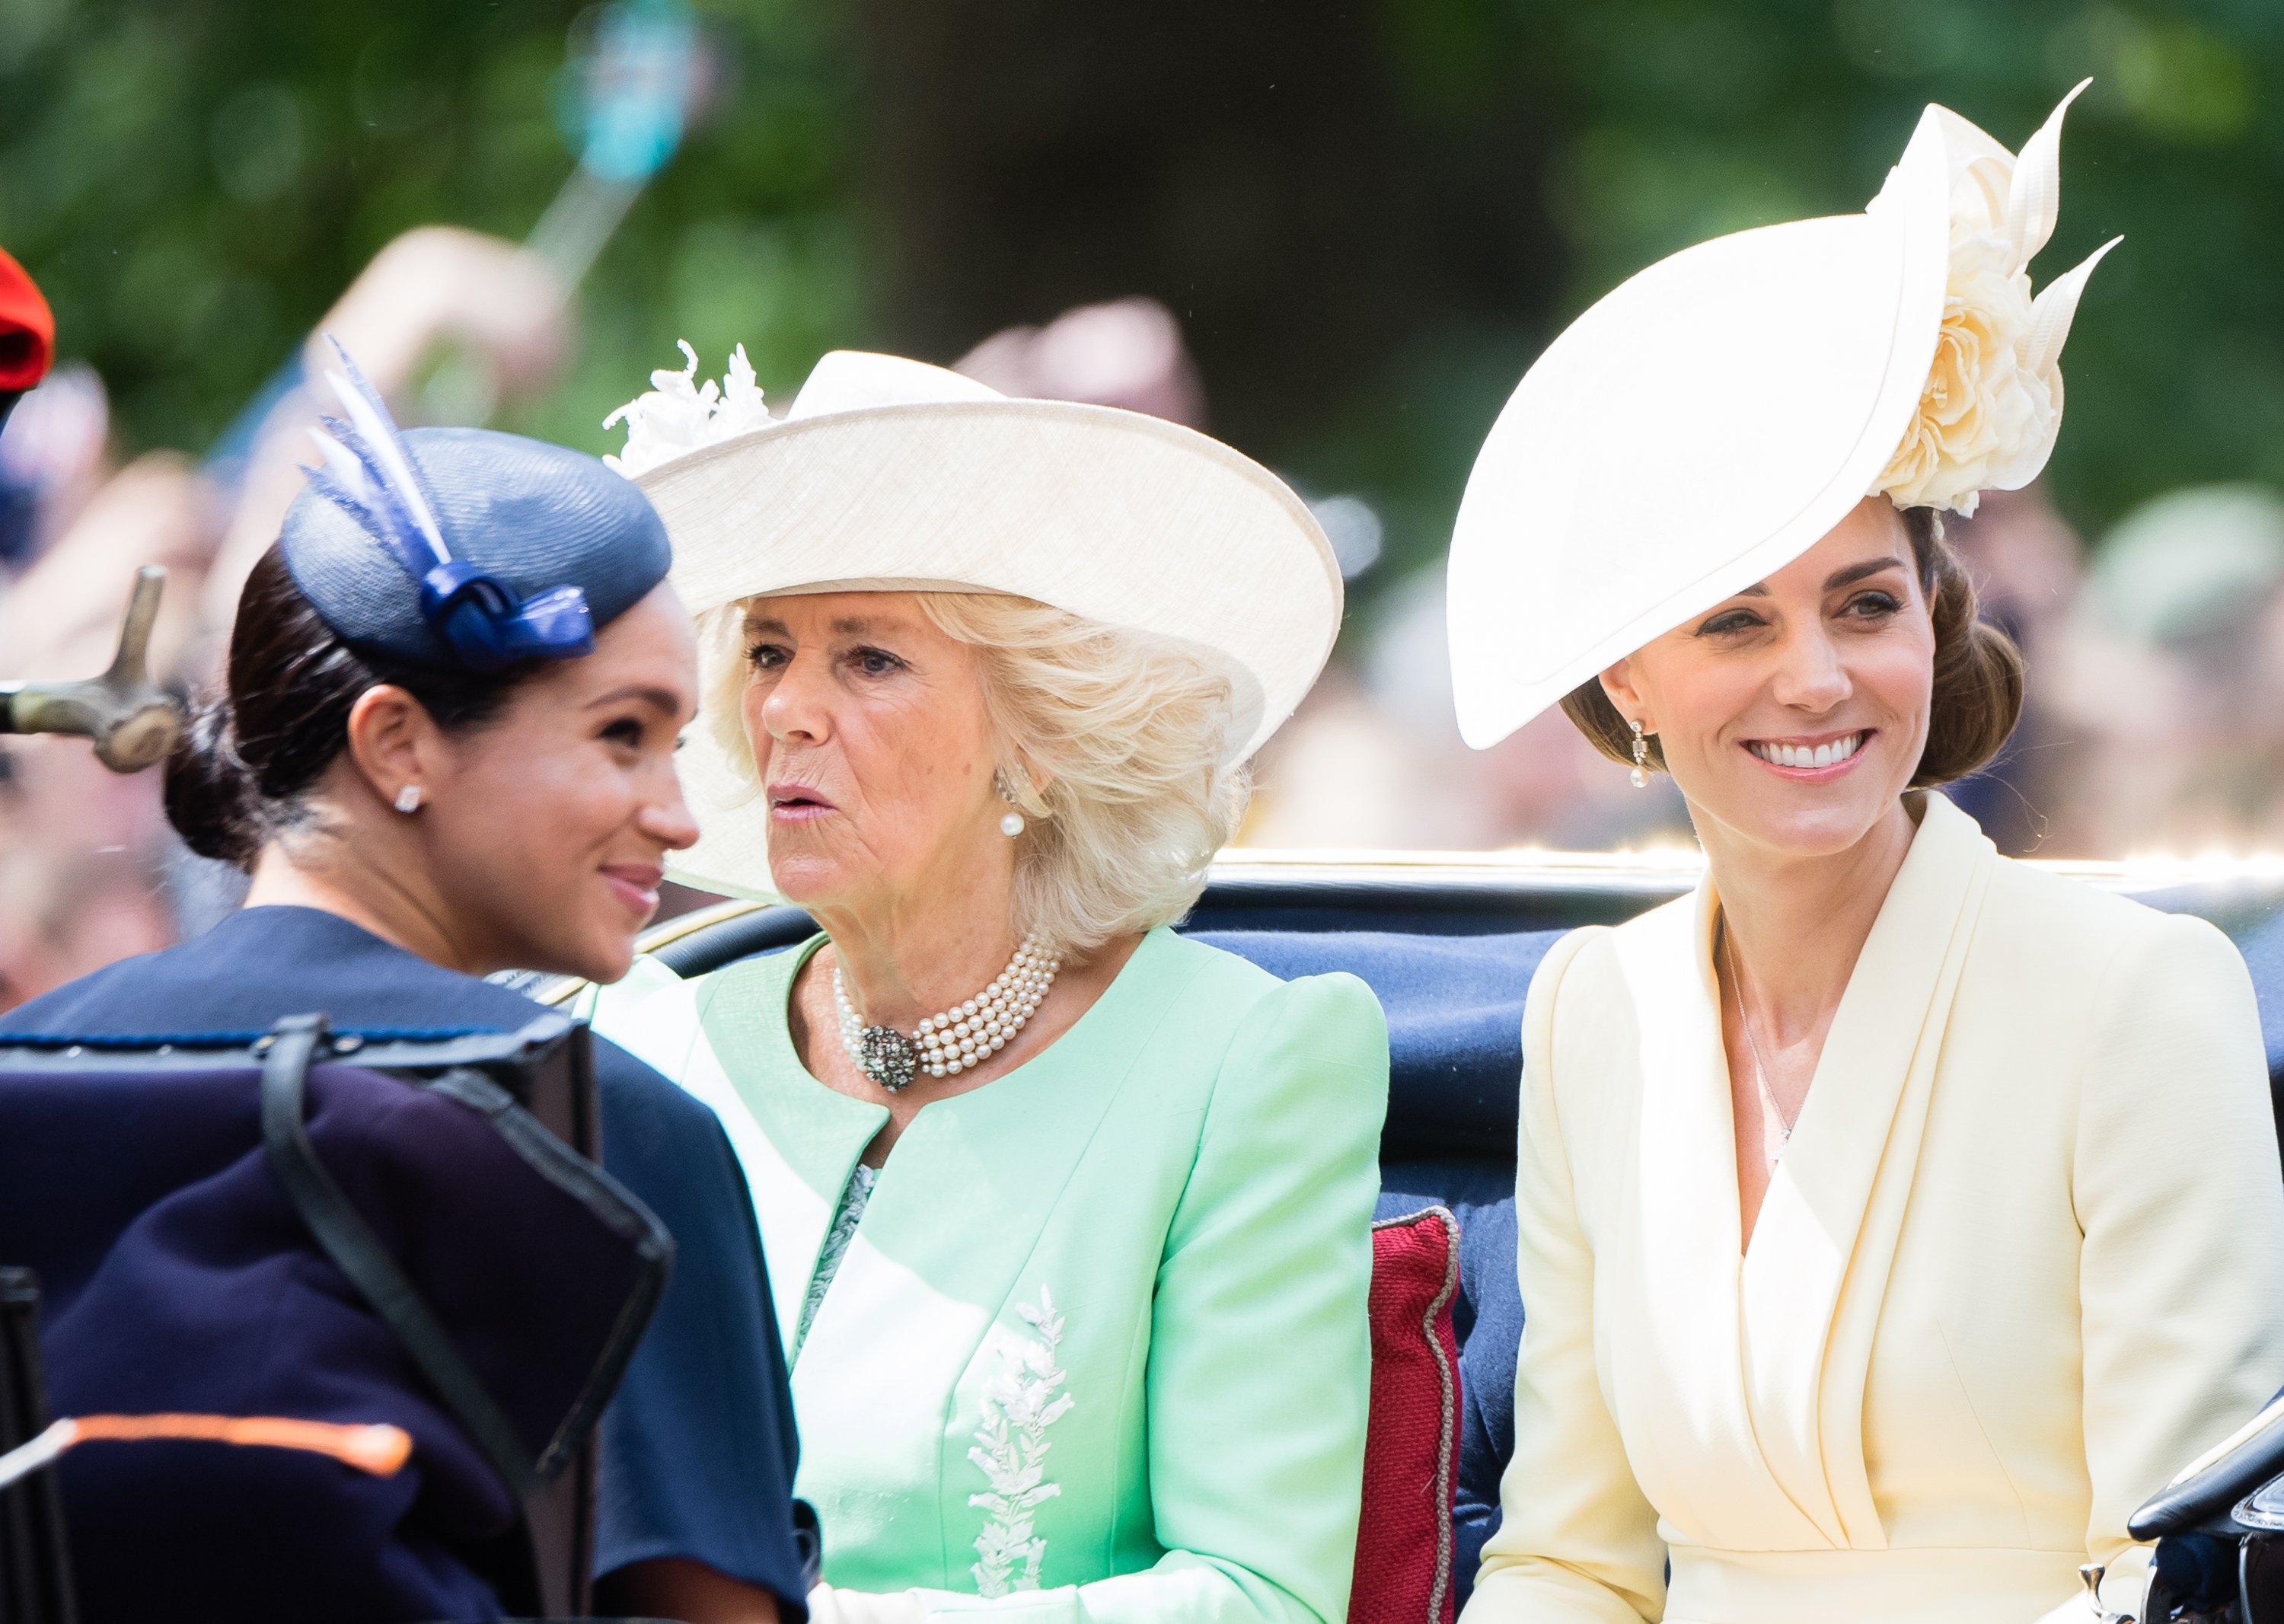 Duchess Meghan, Duchess Camilla, and Duchess Kate ride by carriage down the Mall during Trooping The Colour birthday parade on June 8, 2019, in London, England. | Source: Getty Images